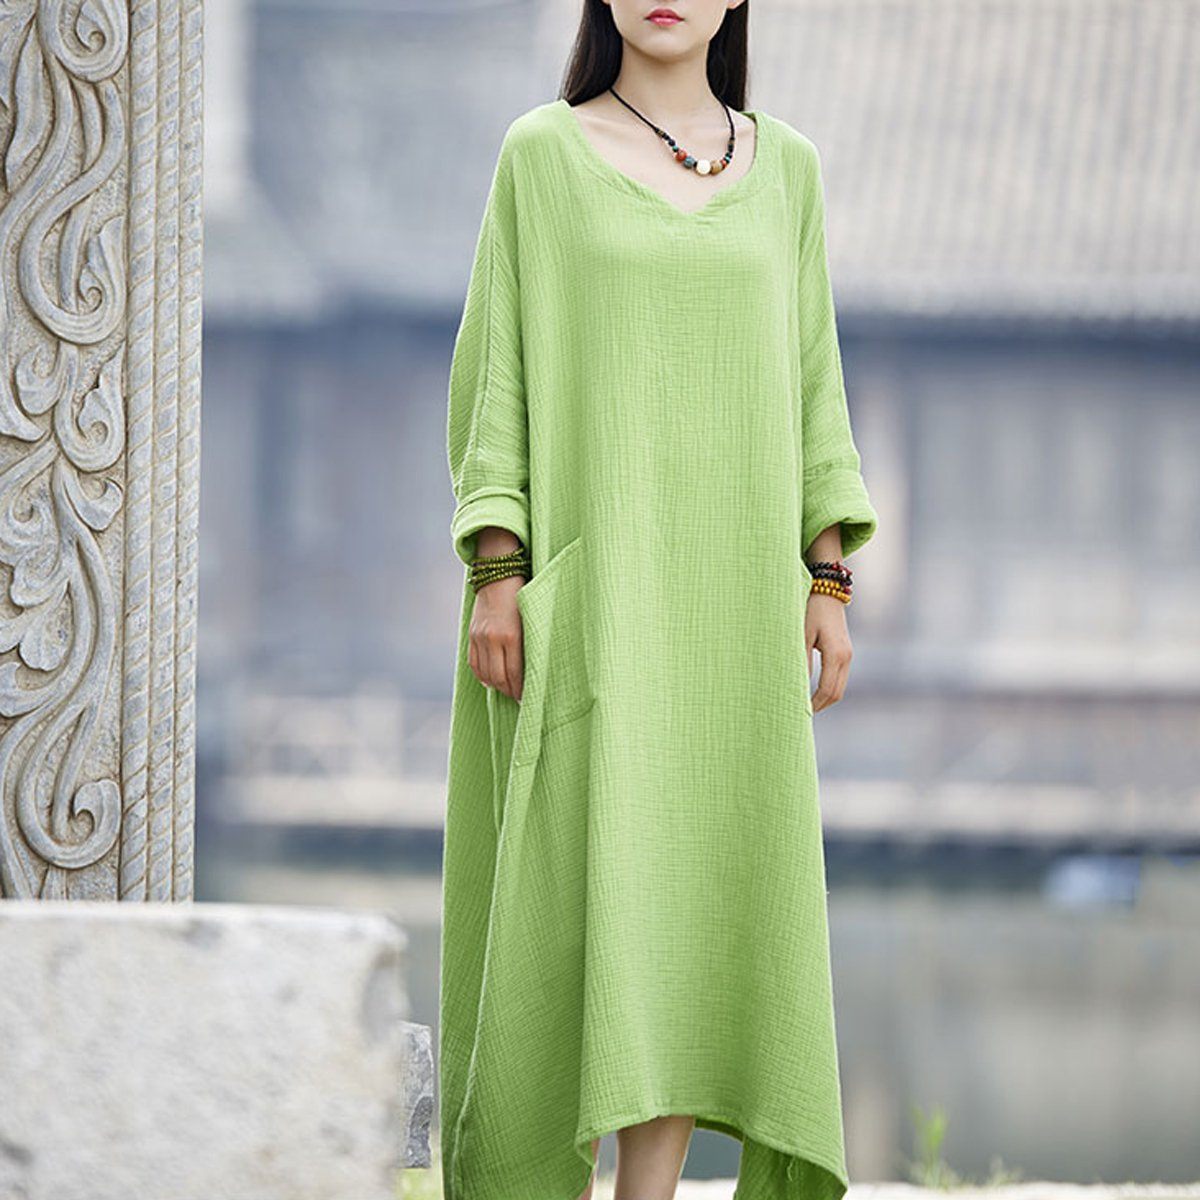 Women Solid Casual Big Pockets Loose Maxi Long Sleeve Dress 2019 May New One Size Green 